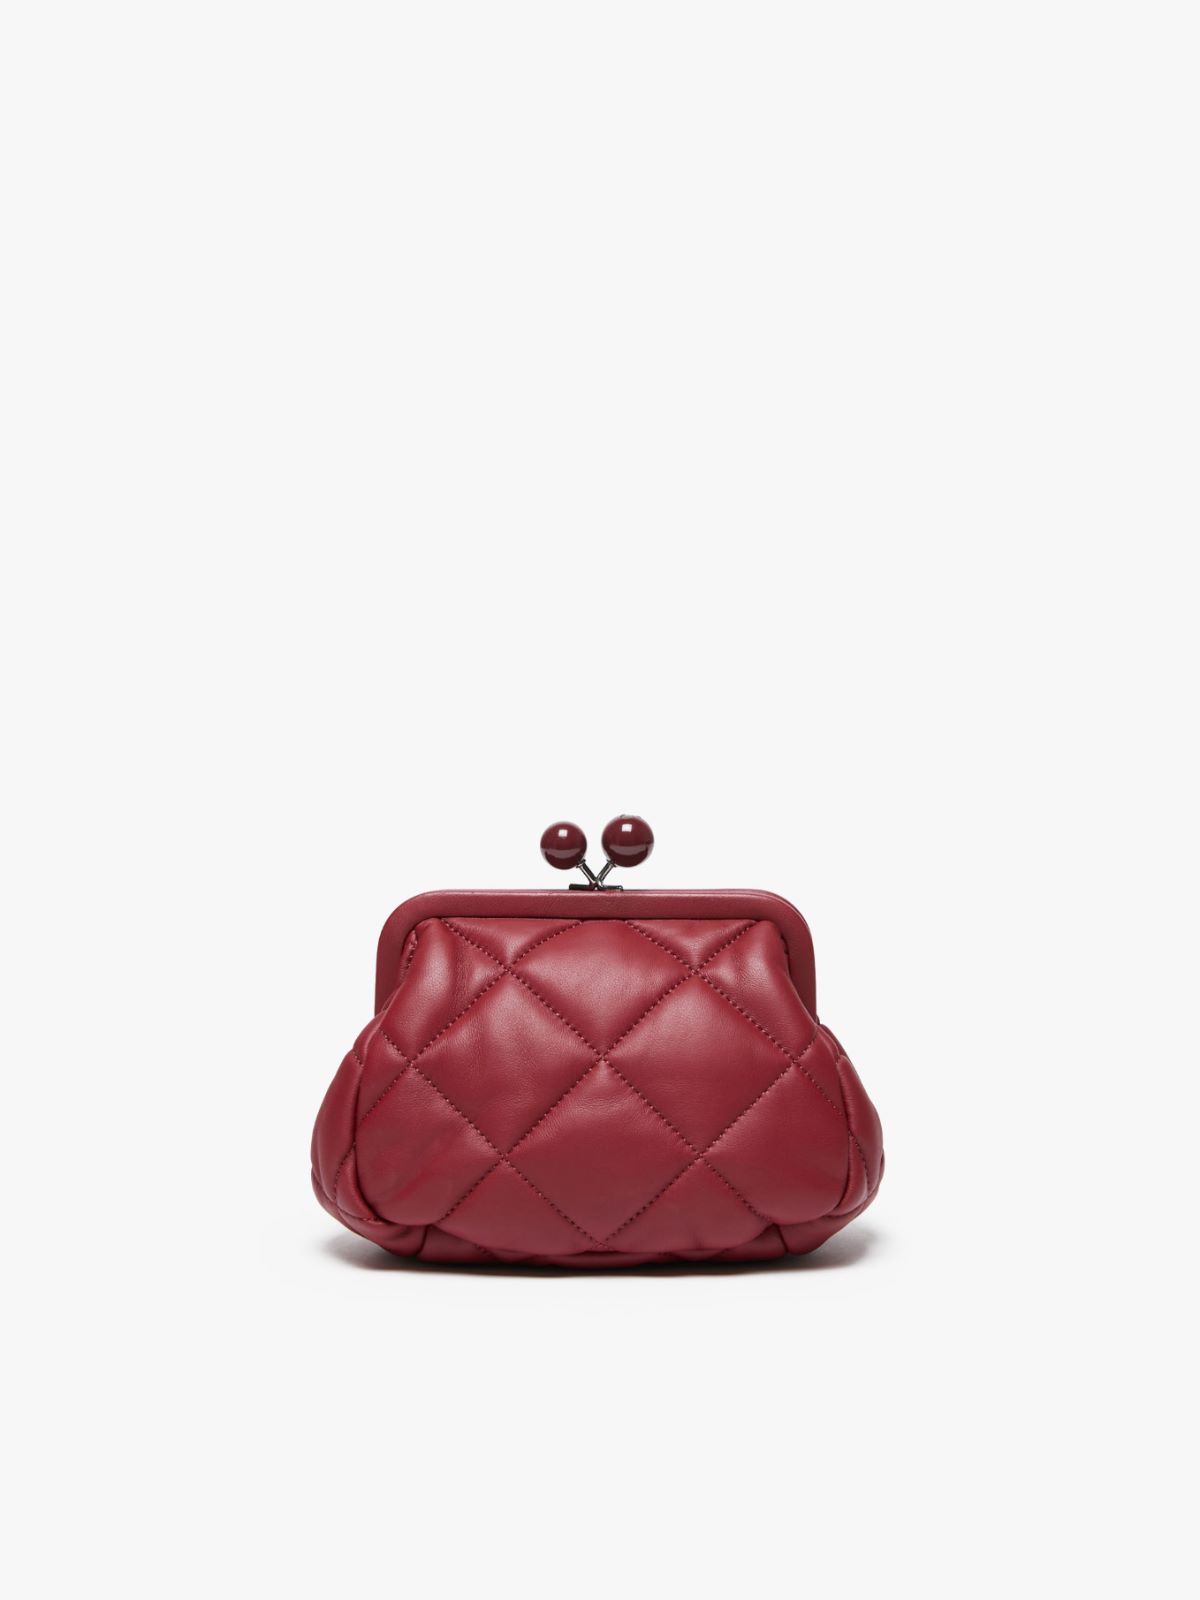 Small Pasticcino Bag in nappa leather - BORDEAUX - Weekend Max Mara - 3